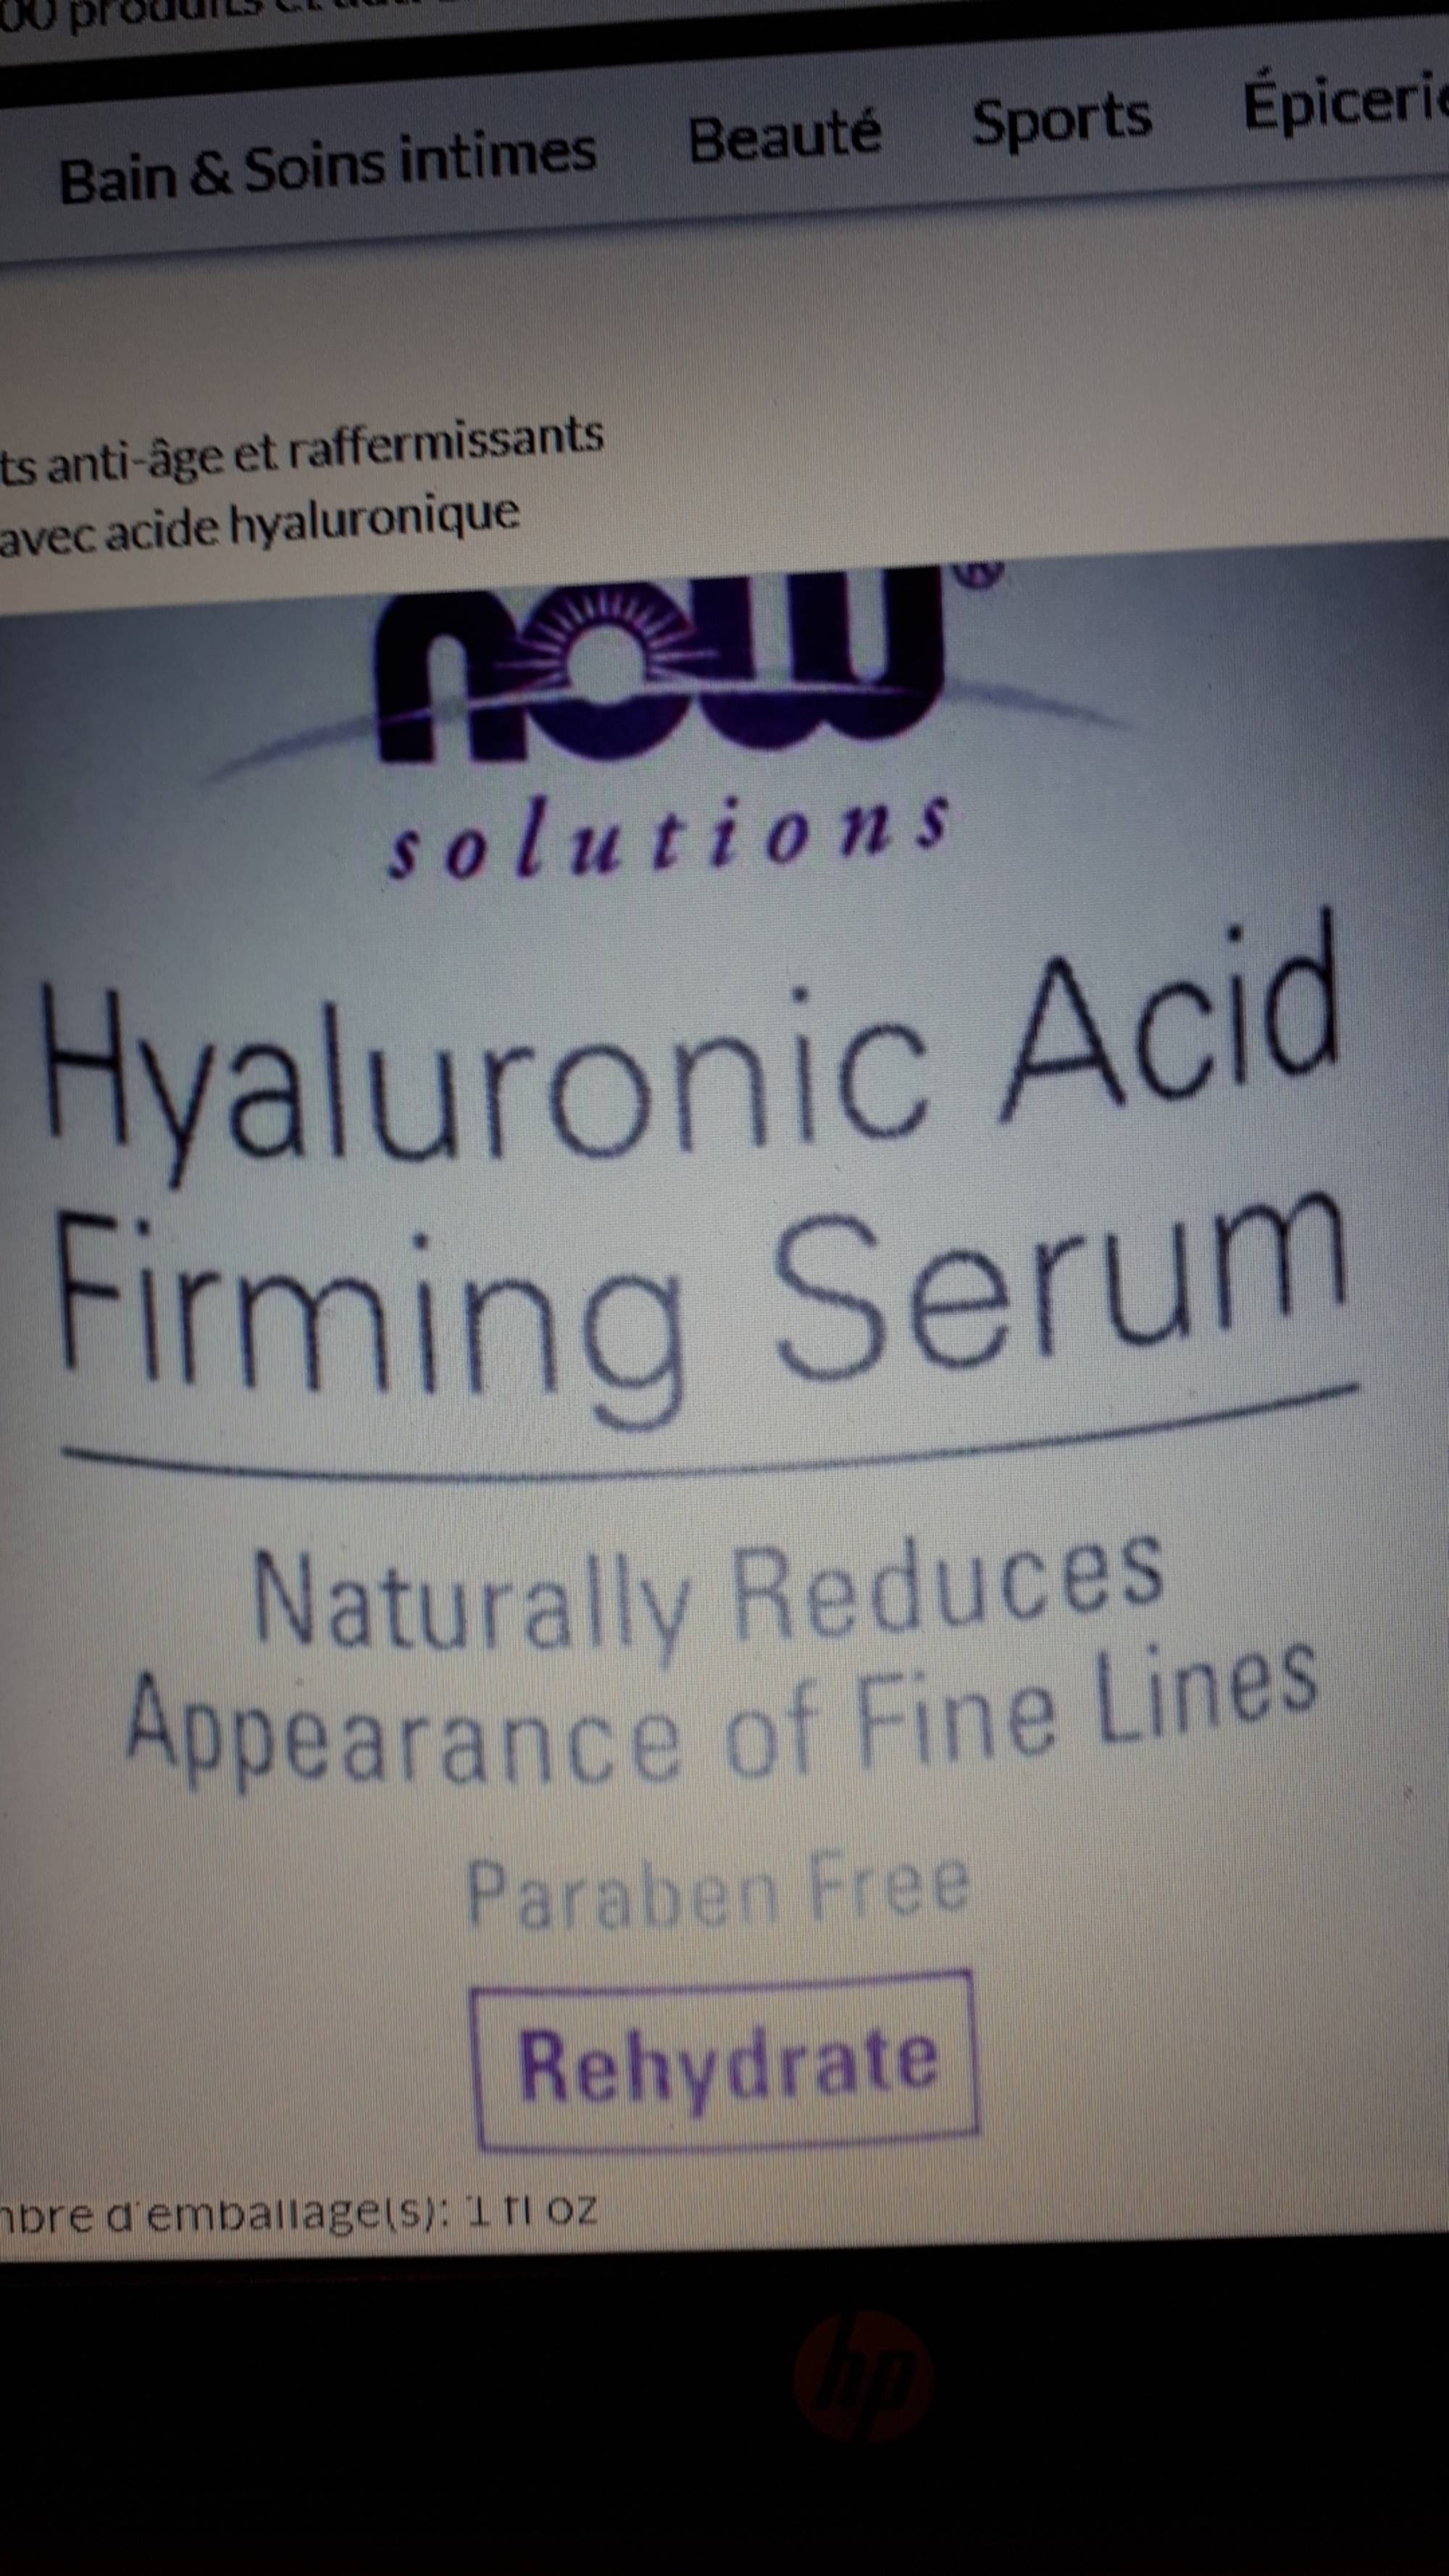 NOW SOLUTIONS - Hyaluronic Acid firming serum